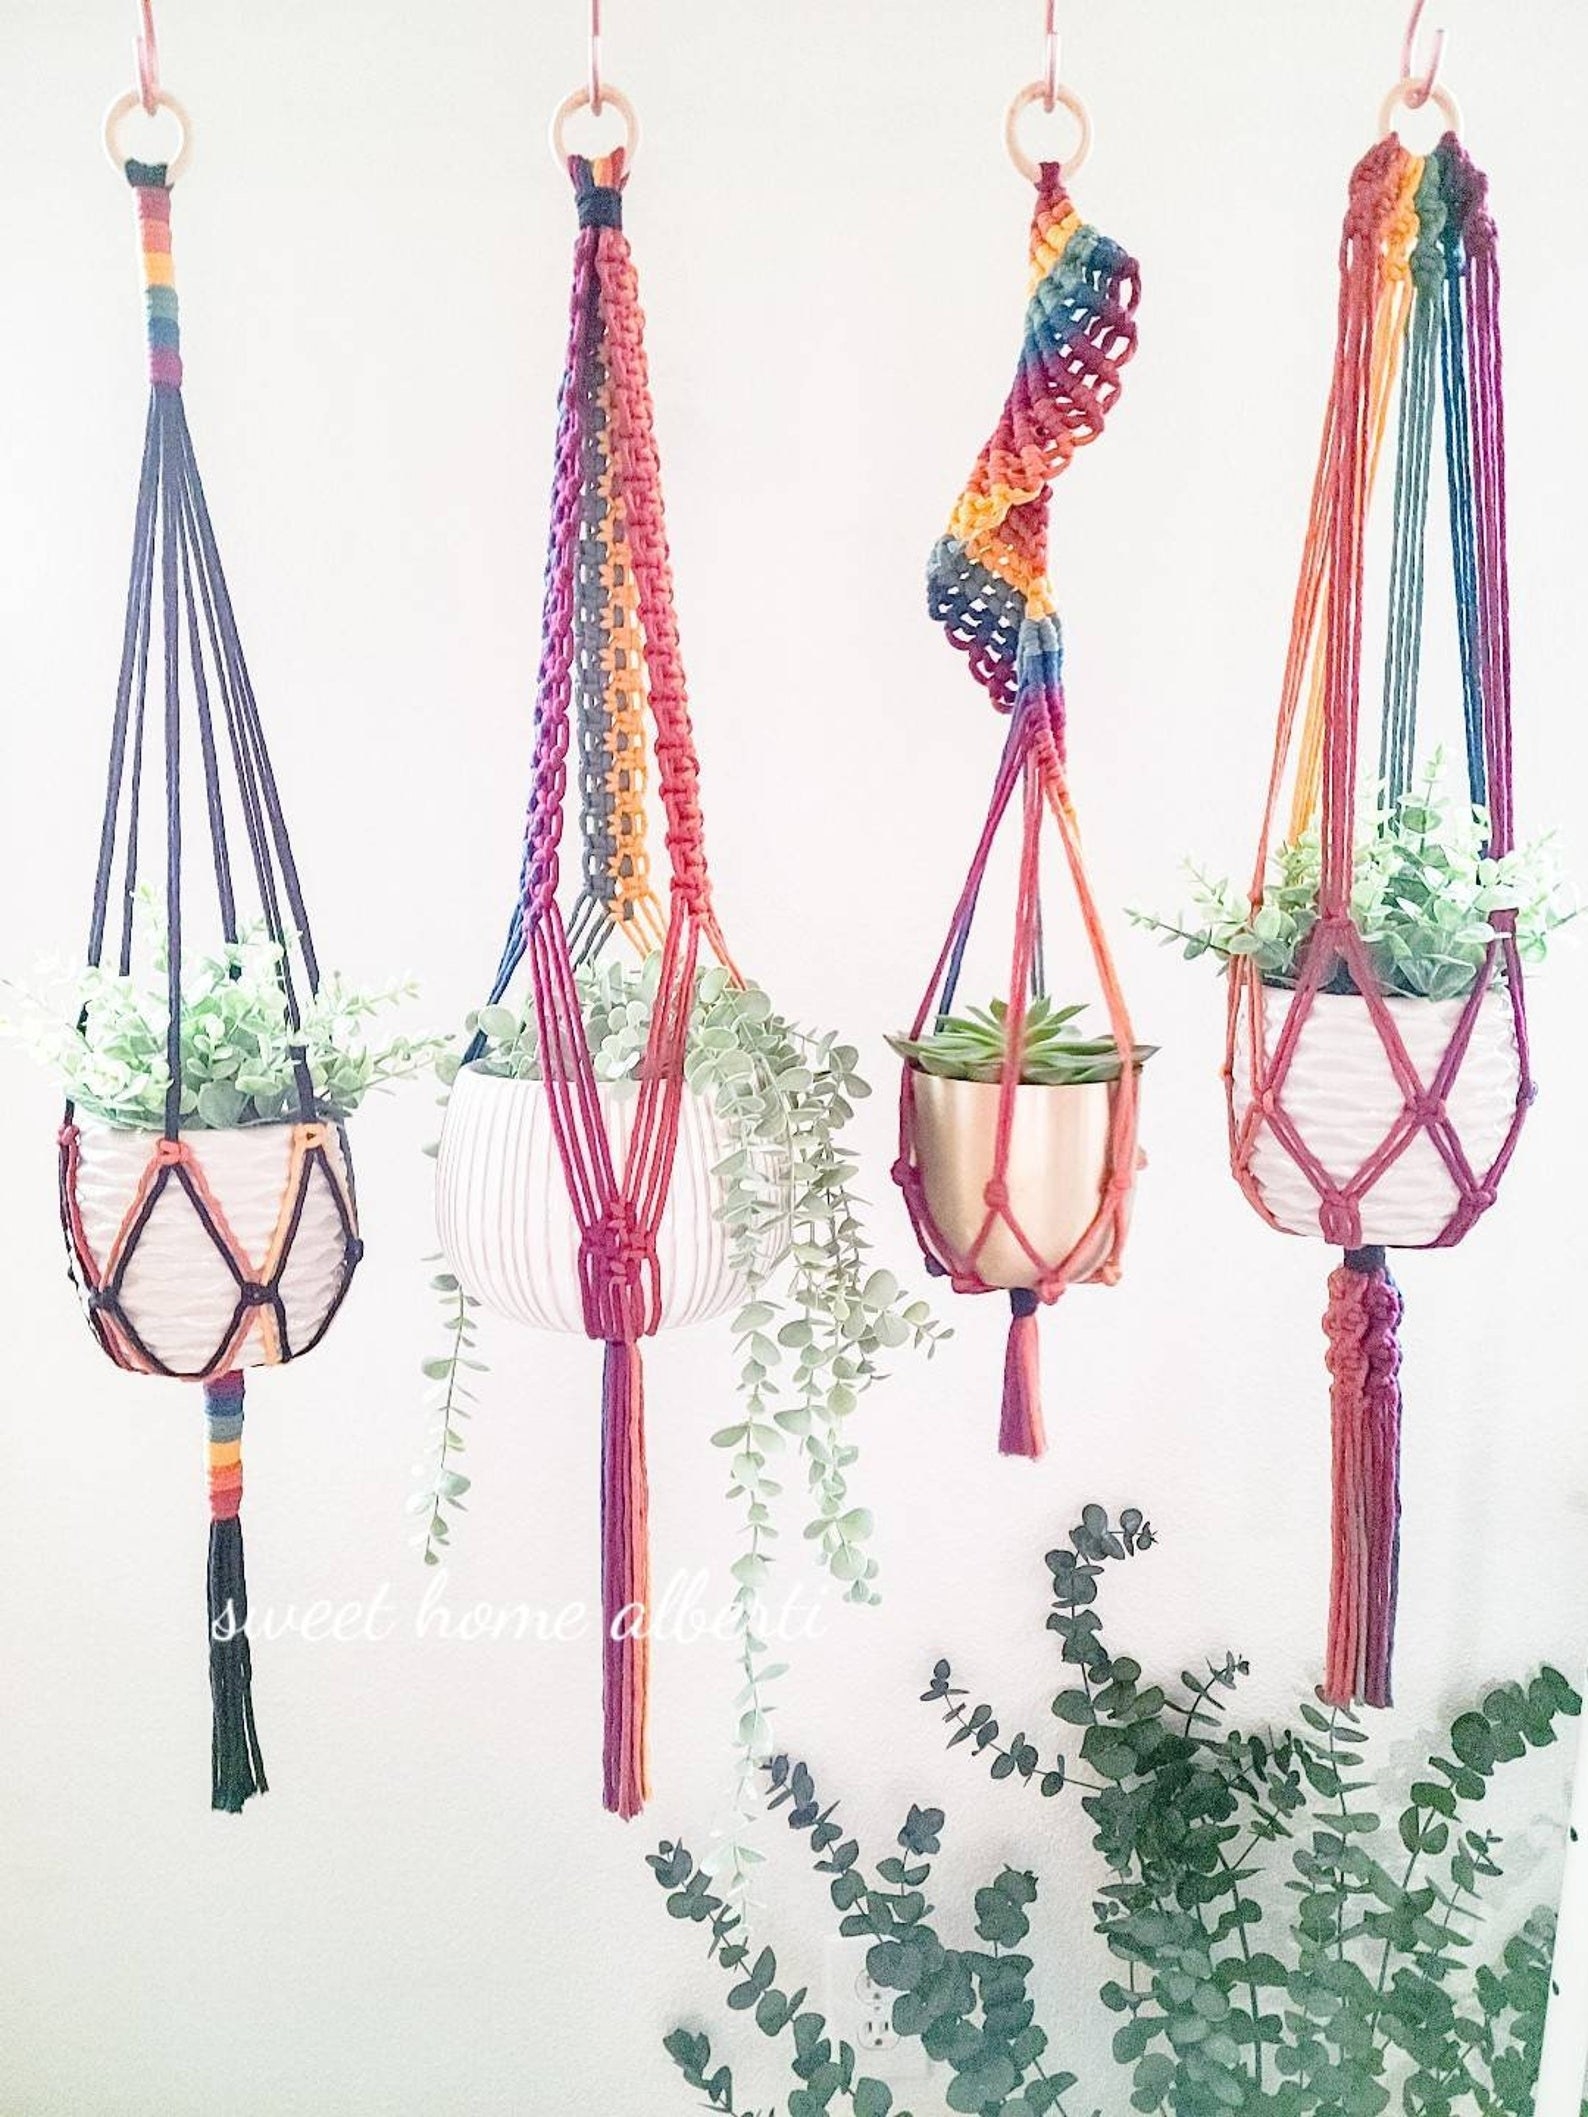 The four rainbow-colored hanging planters